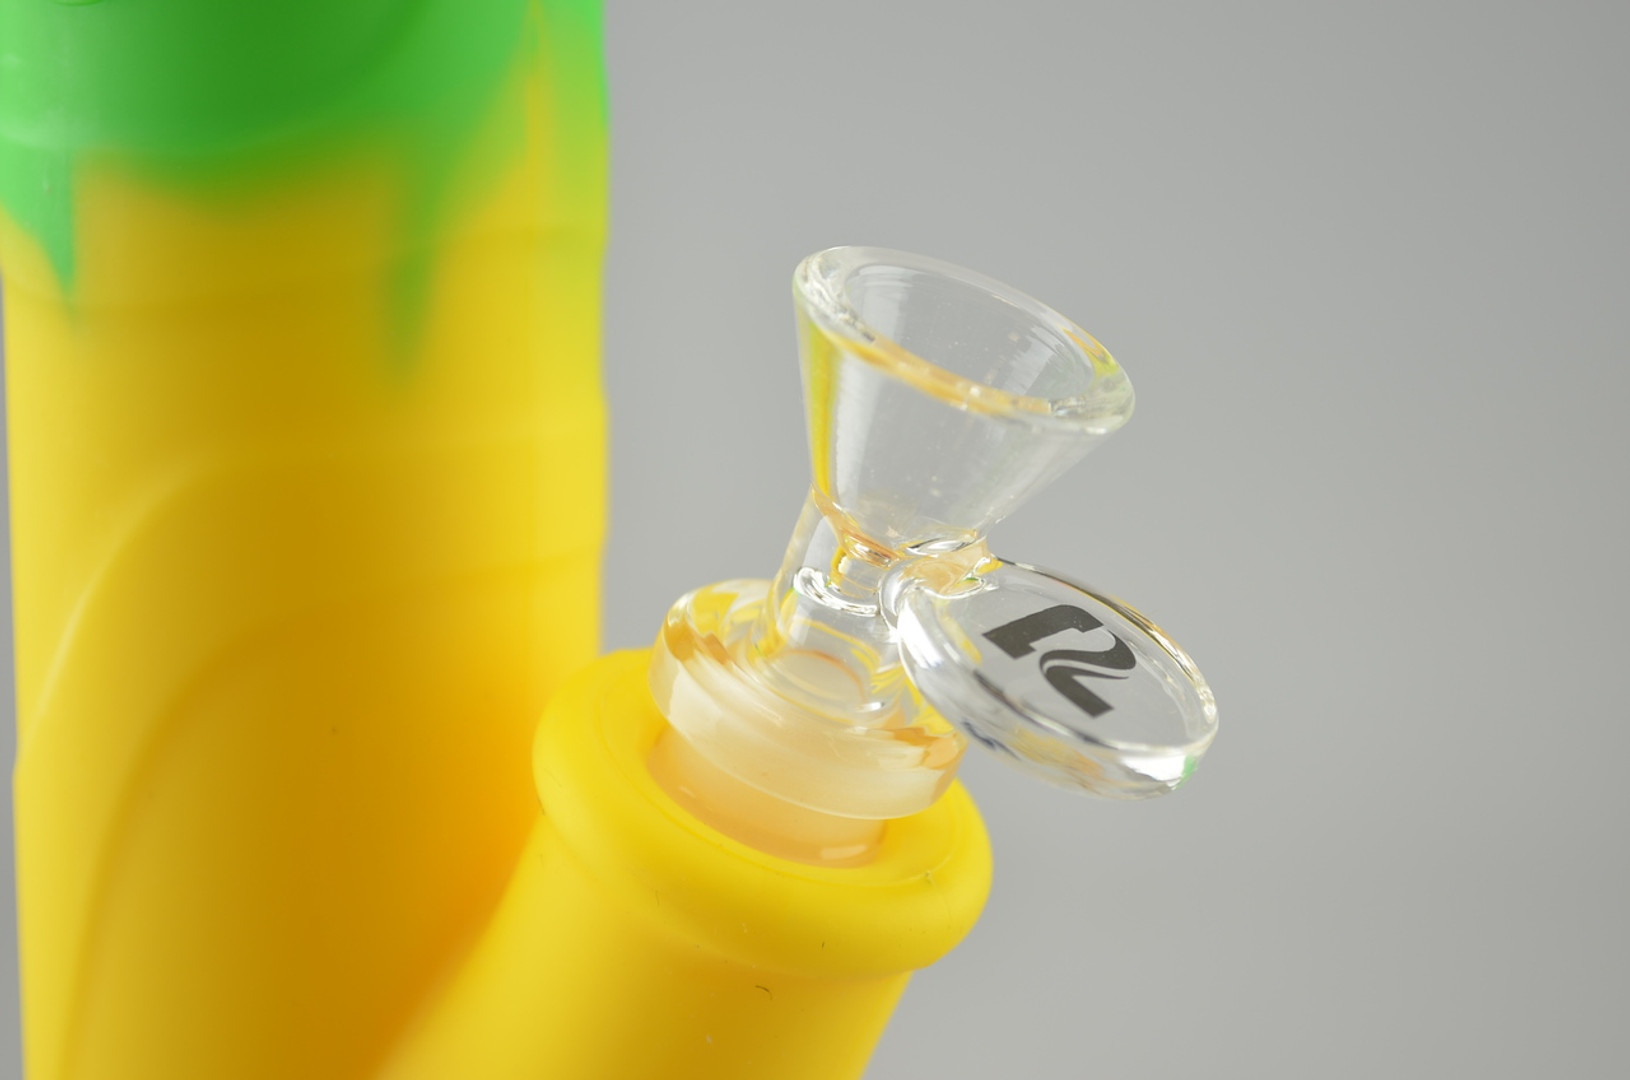 Up To 40% Off on Tie Dye Silicone Dab Rig with